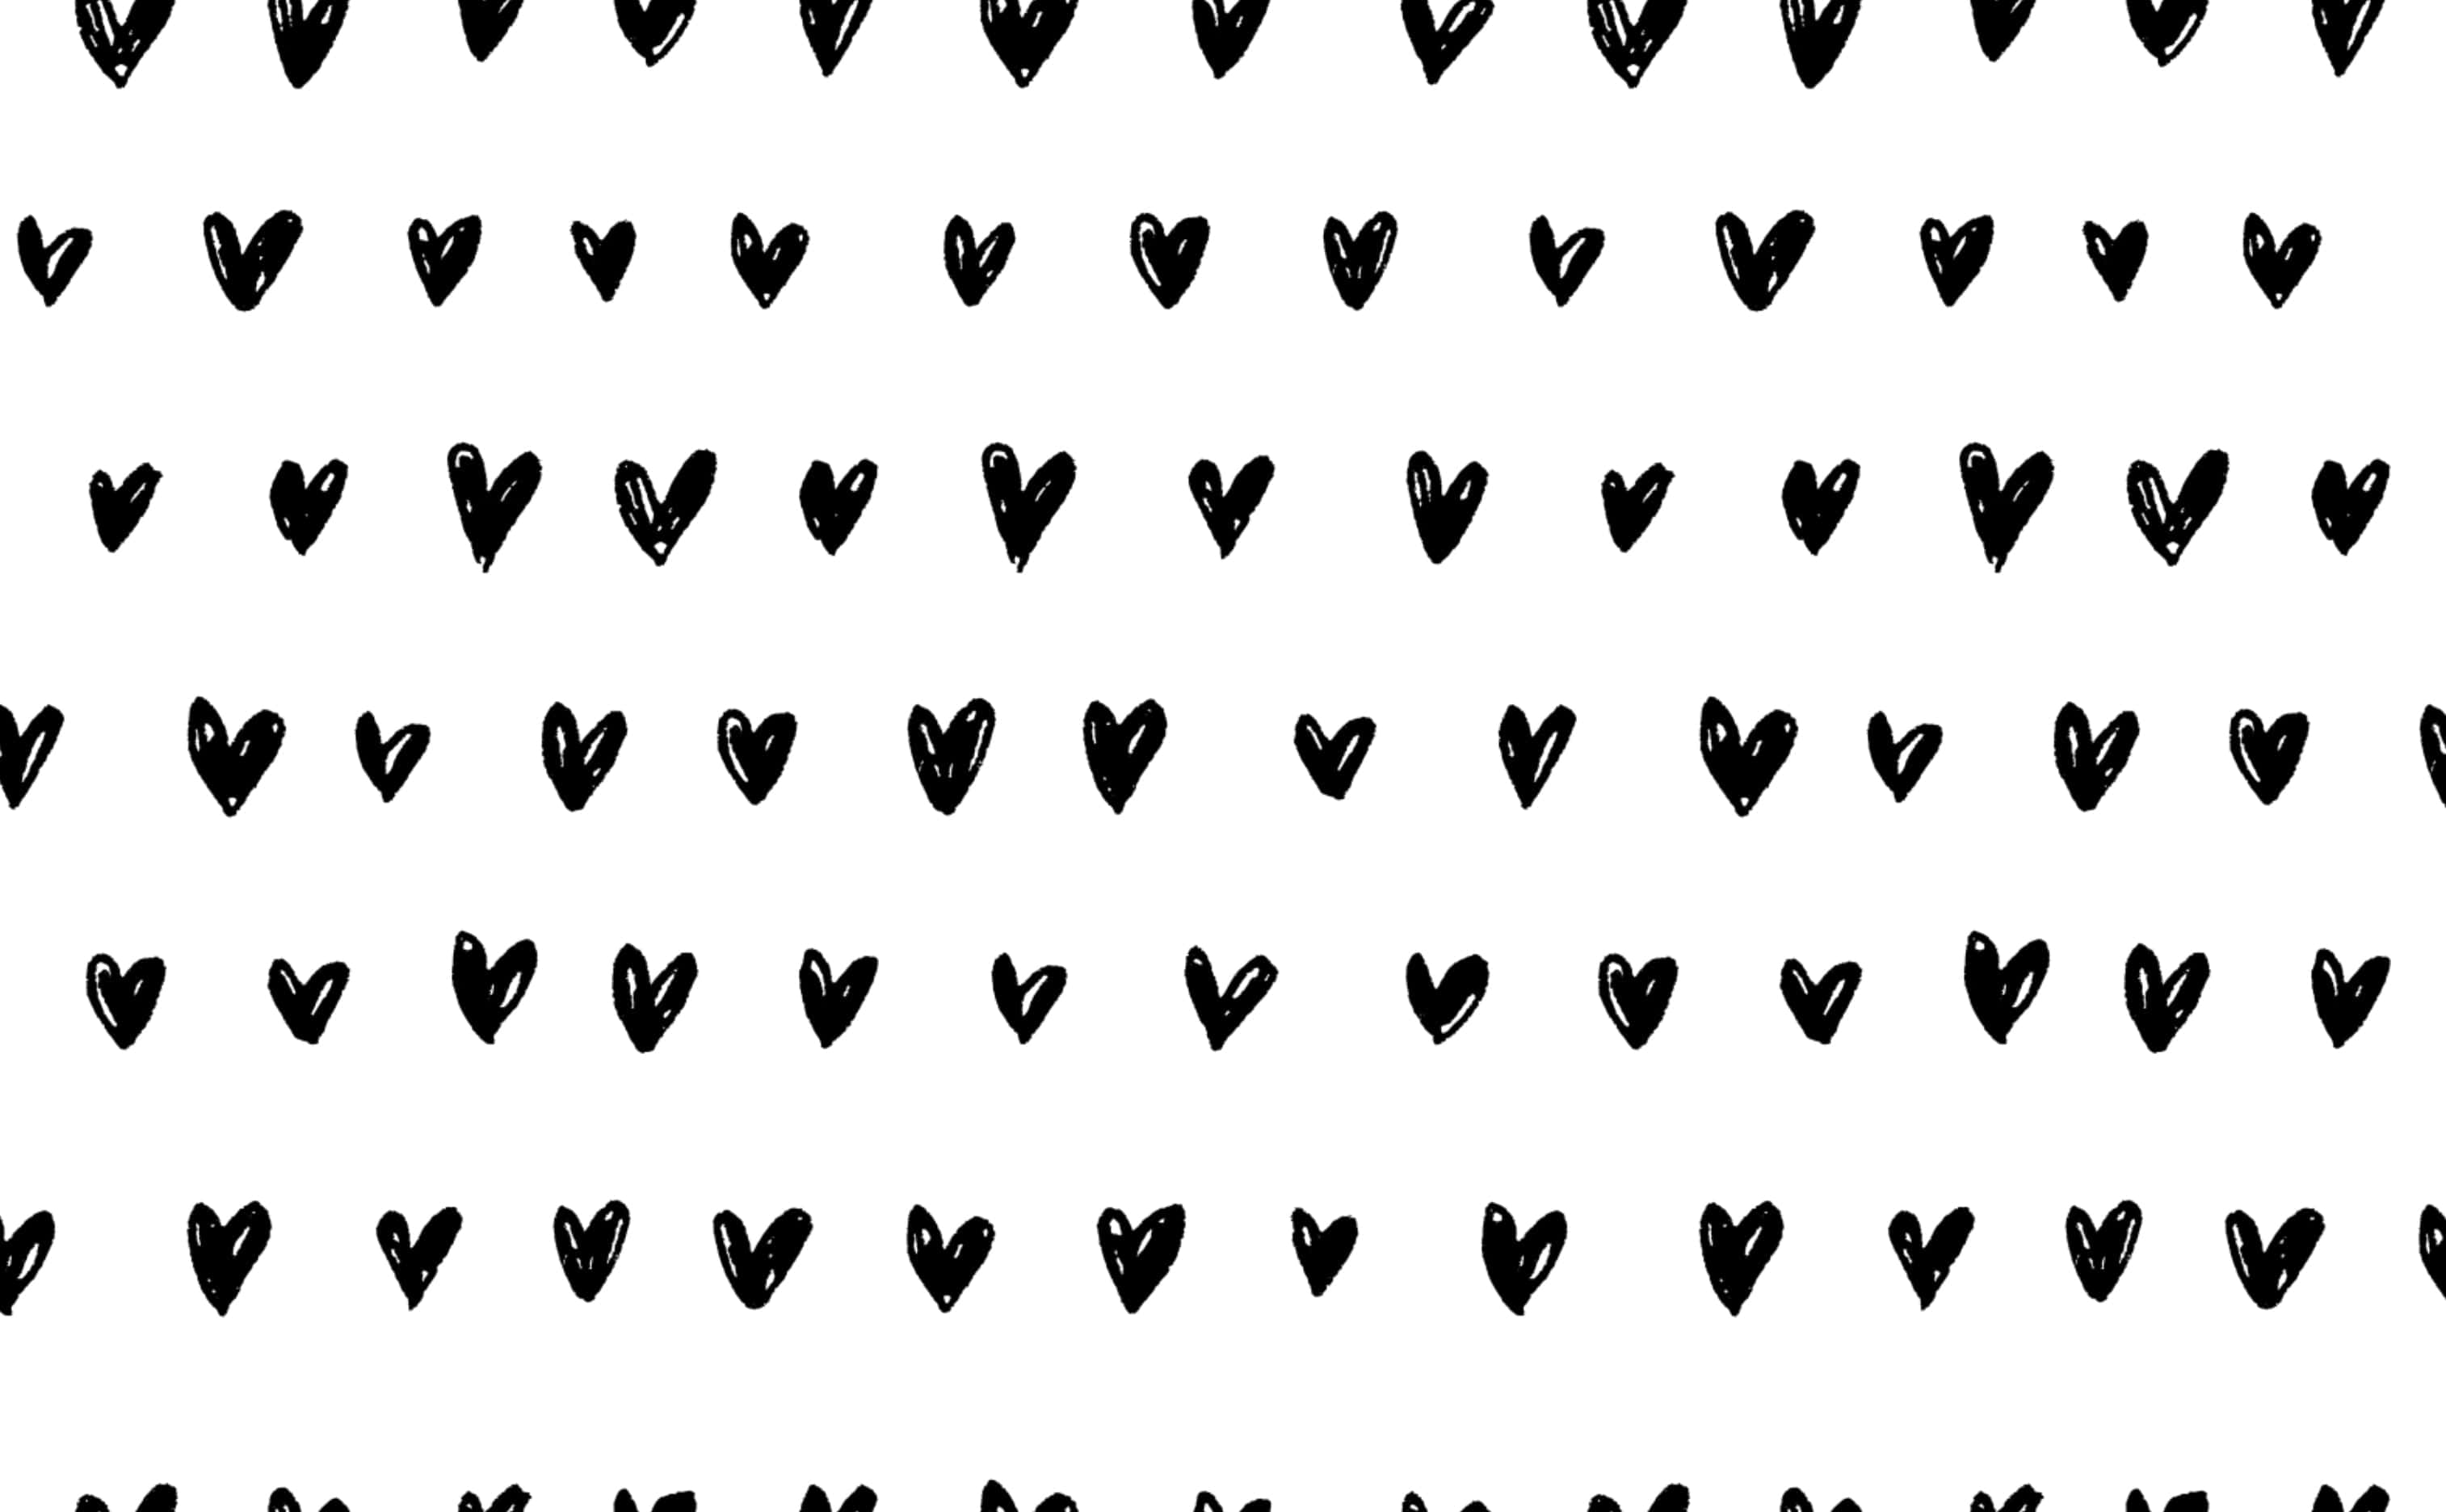 Black And White Heart Background